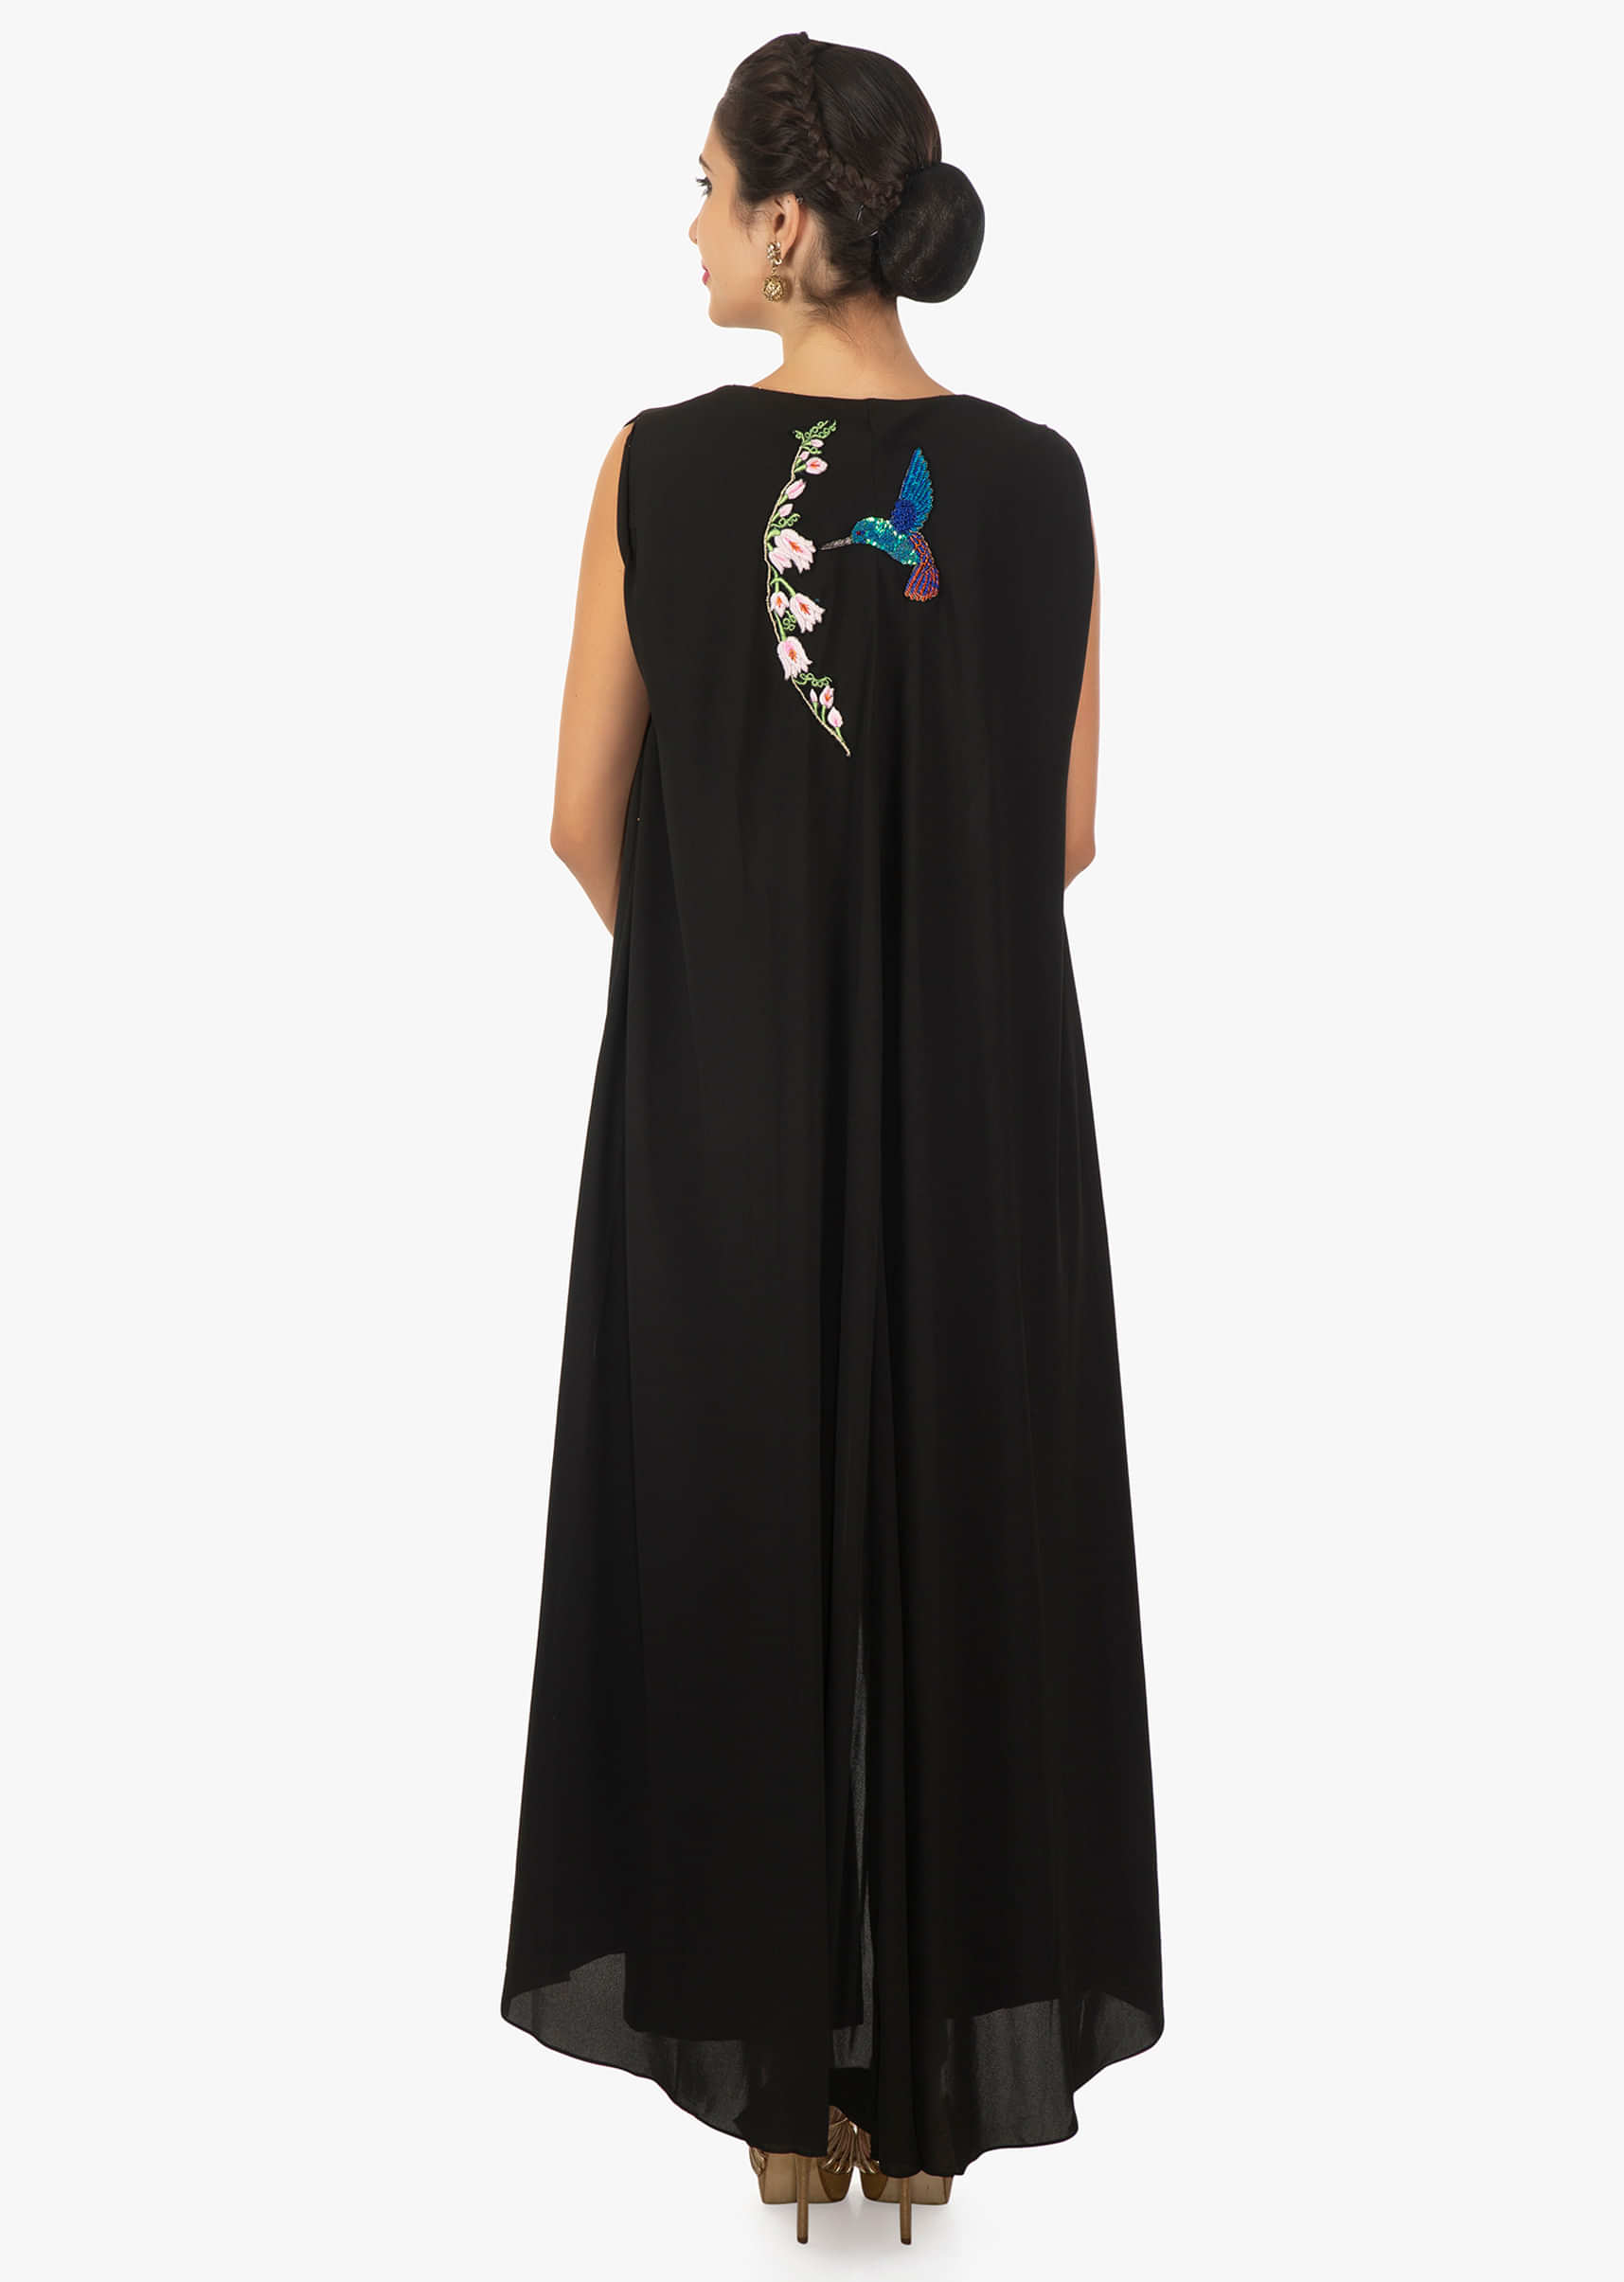 Black Tunic In Georgette With Front And Side Slits Online - Kalki Fashion